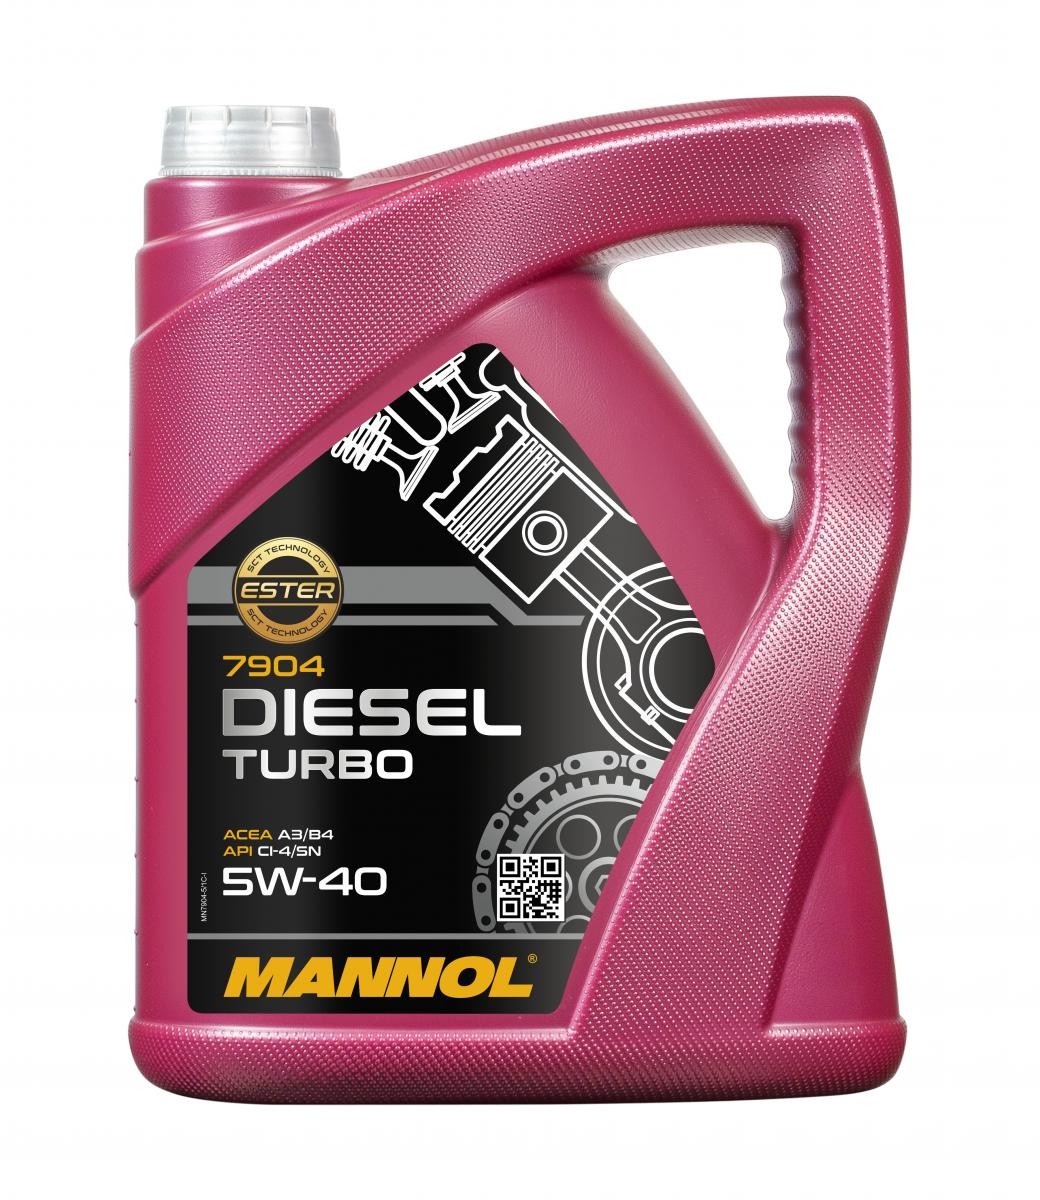 MN7904-5 MANNOL Oil AUDI 5W-40, 5l, Synthetic Oil